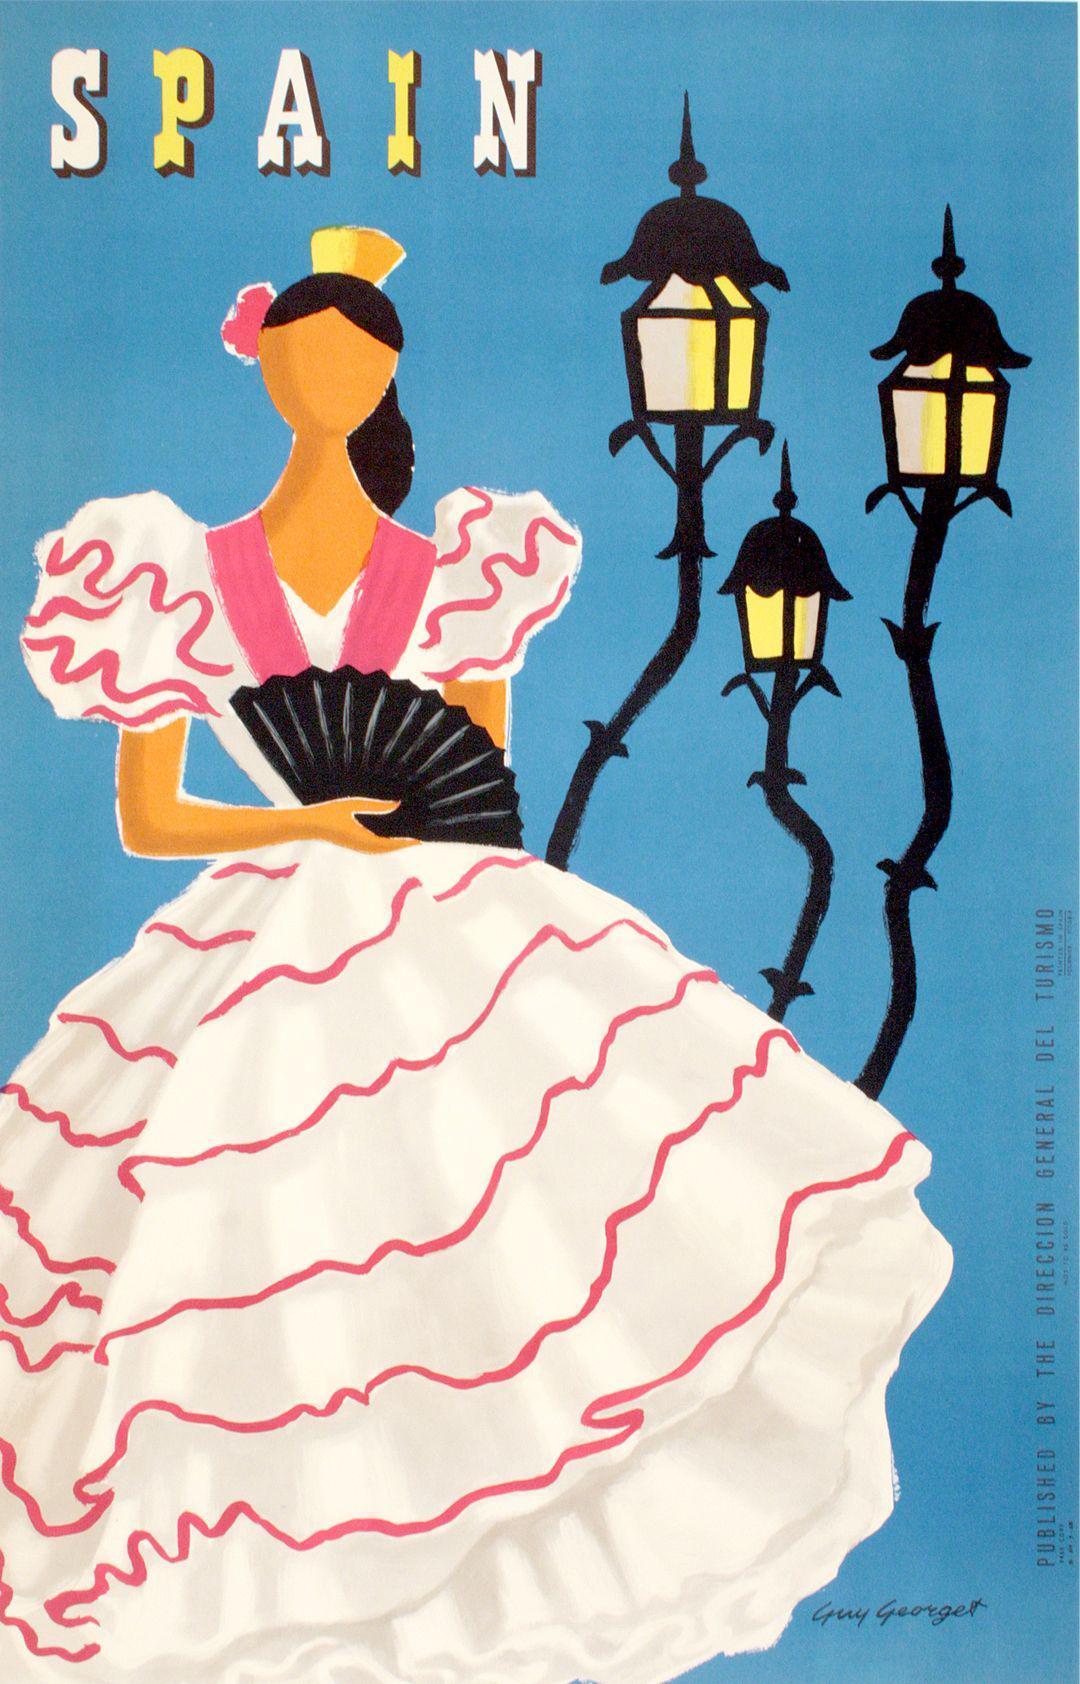 Original Travel Poster c1955 by Guy Georget - Spain Woman in White Dress